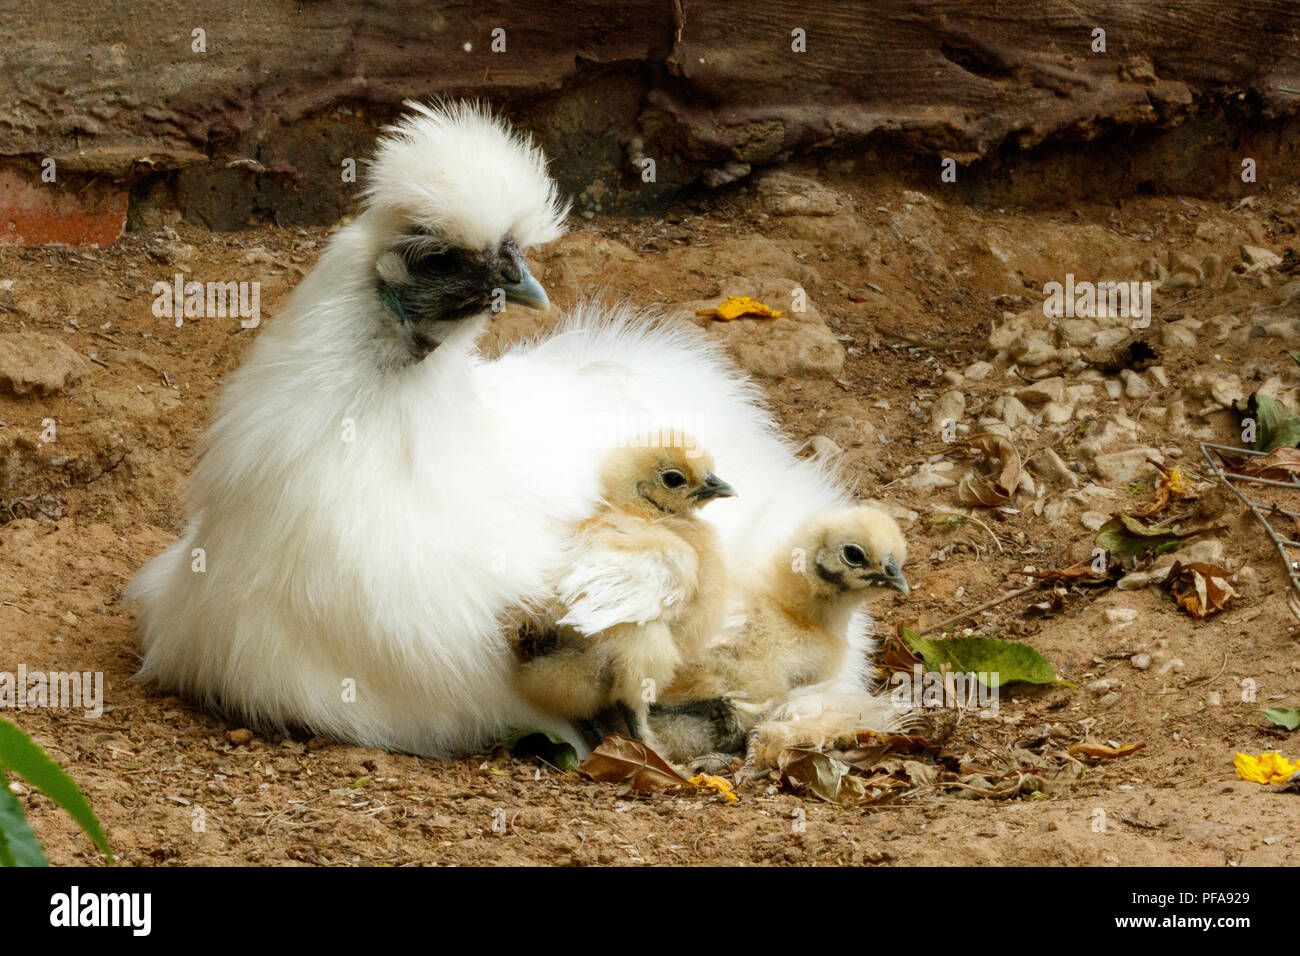 Mom and her baby Chicks sitting together on the ground Stock Photo